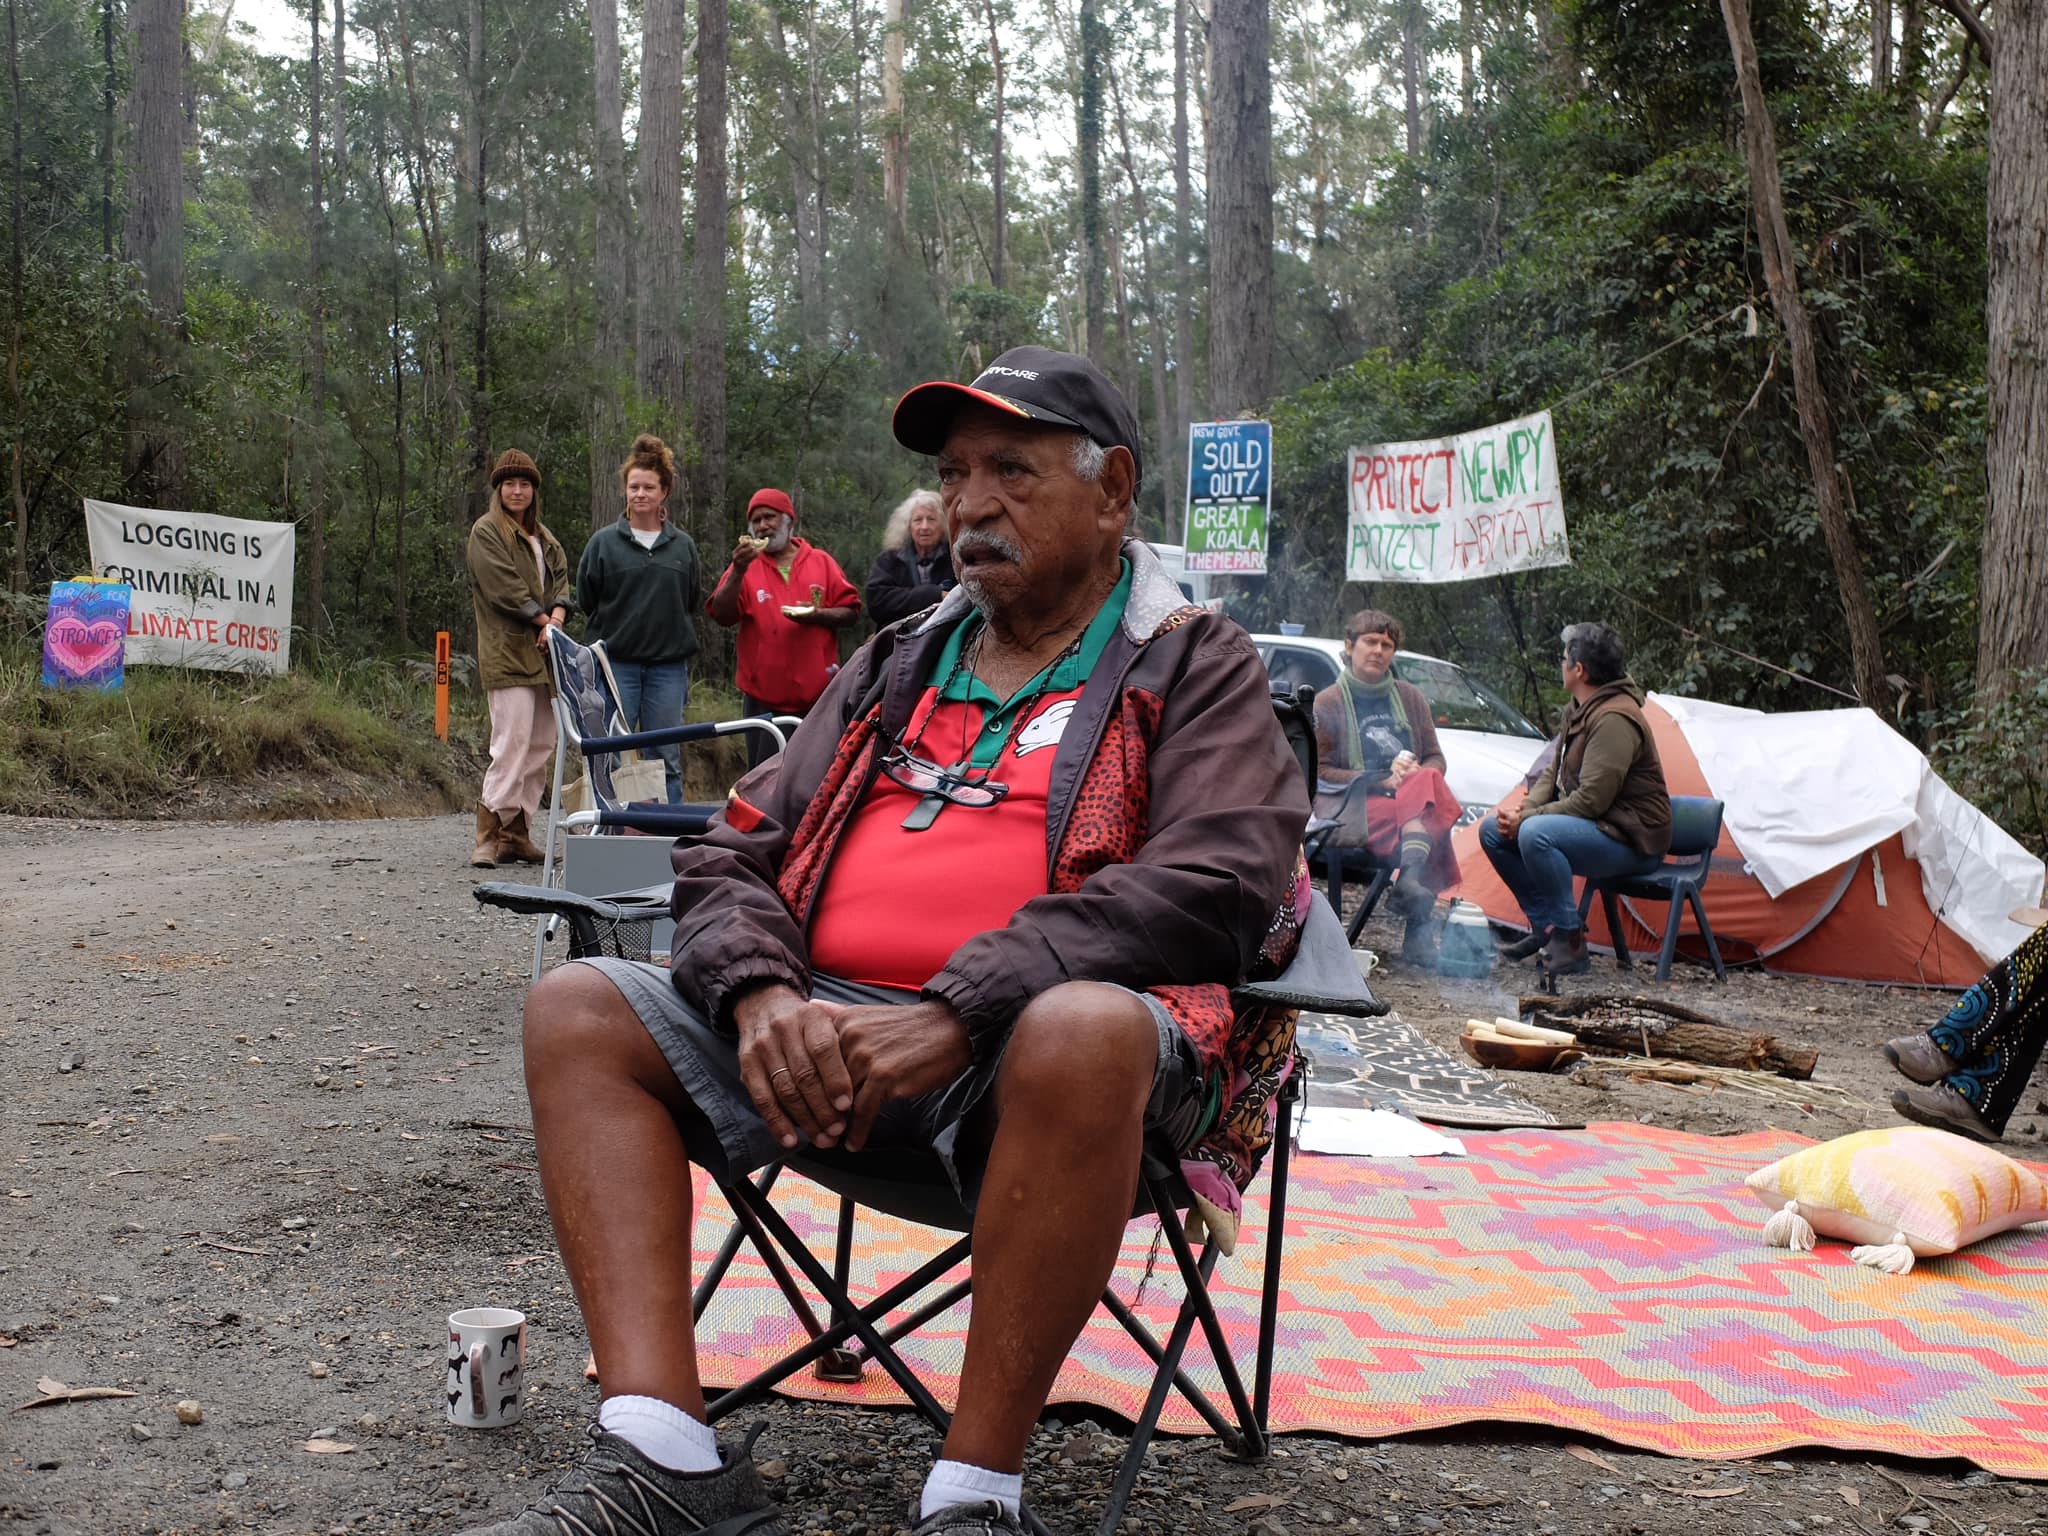 First Nations elders were integral to the protest at Newry Forest